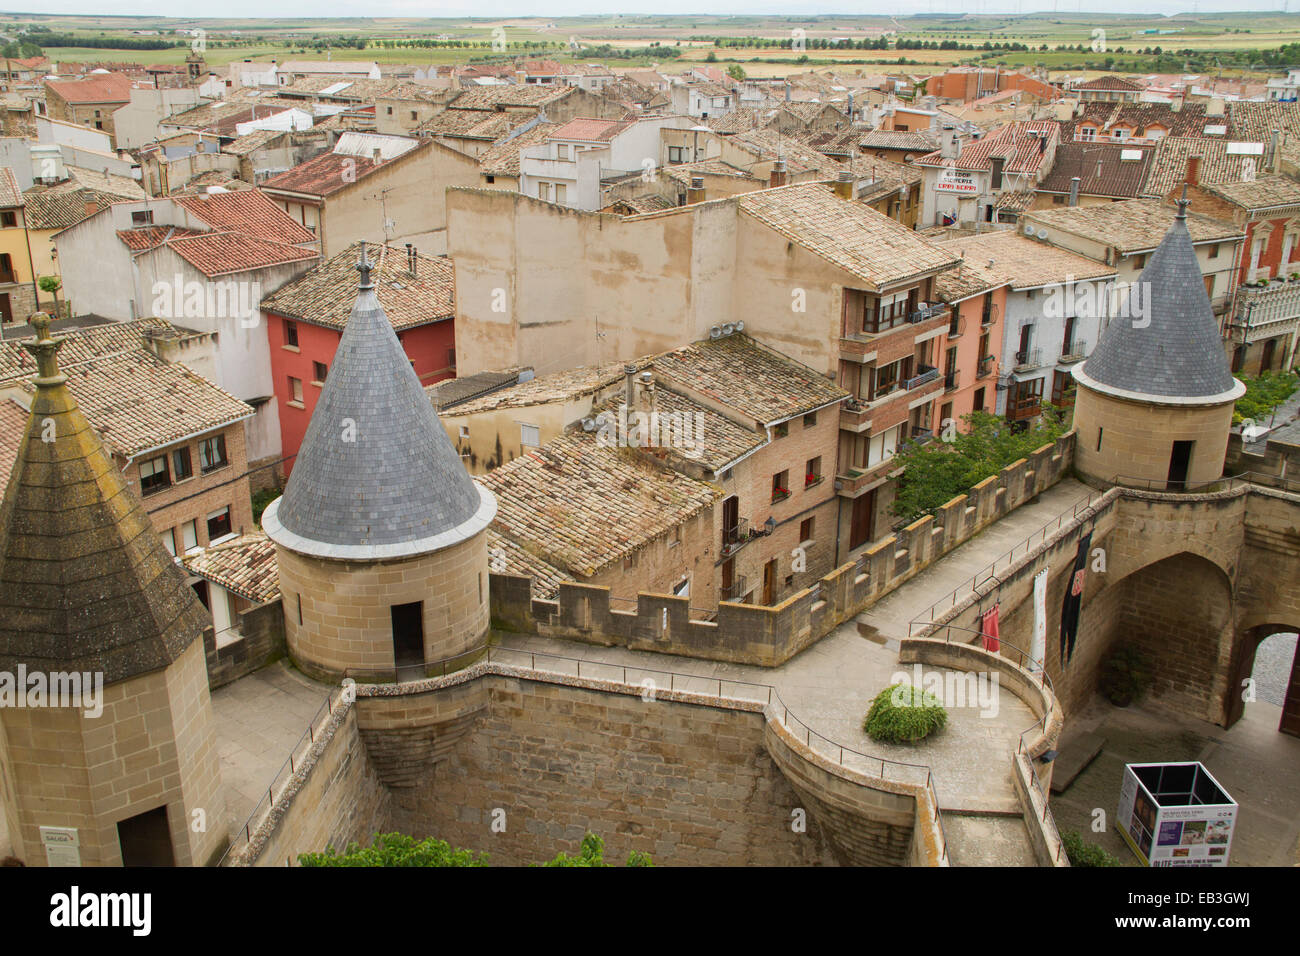 Outter walls of the Royal Palace and the City of Olite Olite,Spain Stock Photo